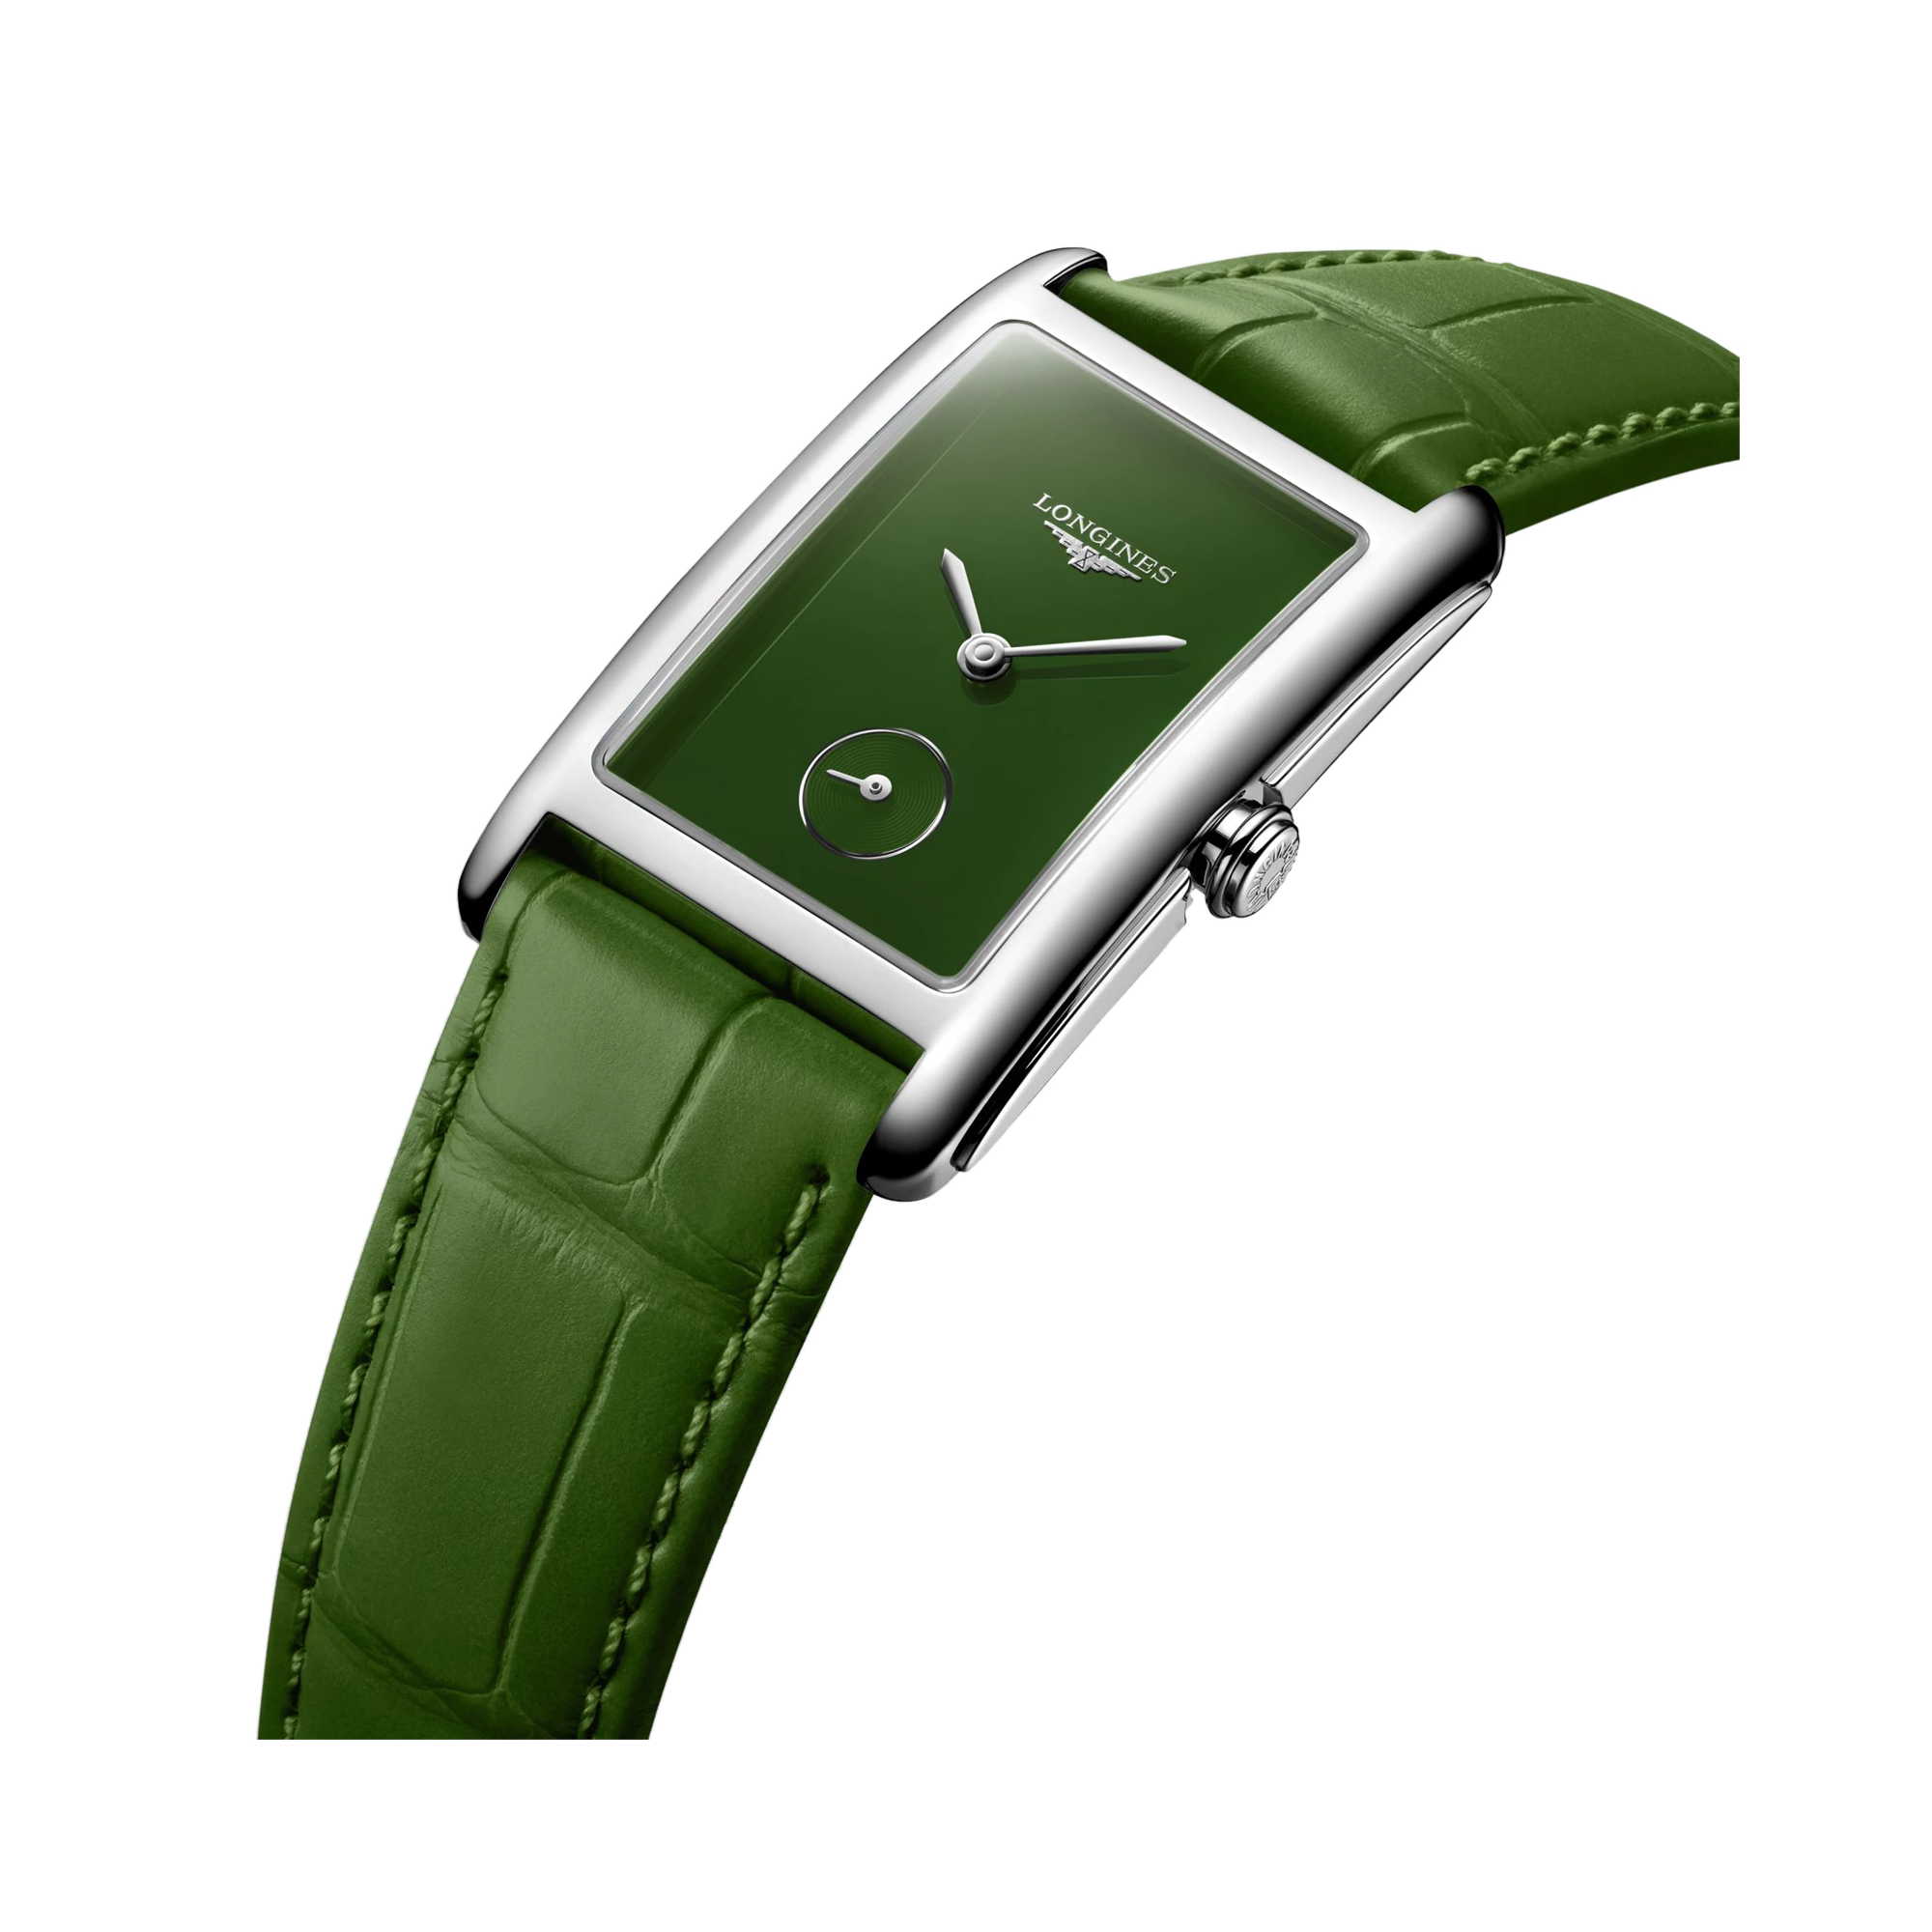 Longines DolceVita 23.3mm, Green Dial, N/A Numerals_4